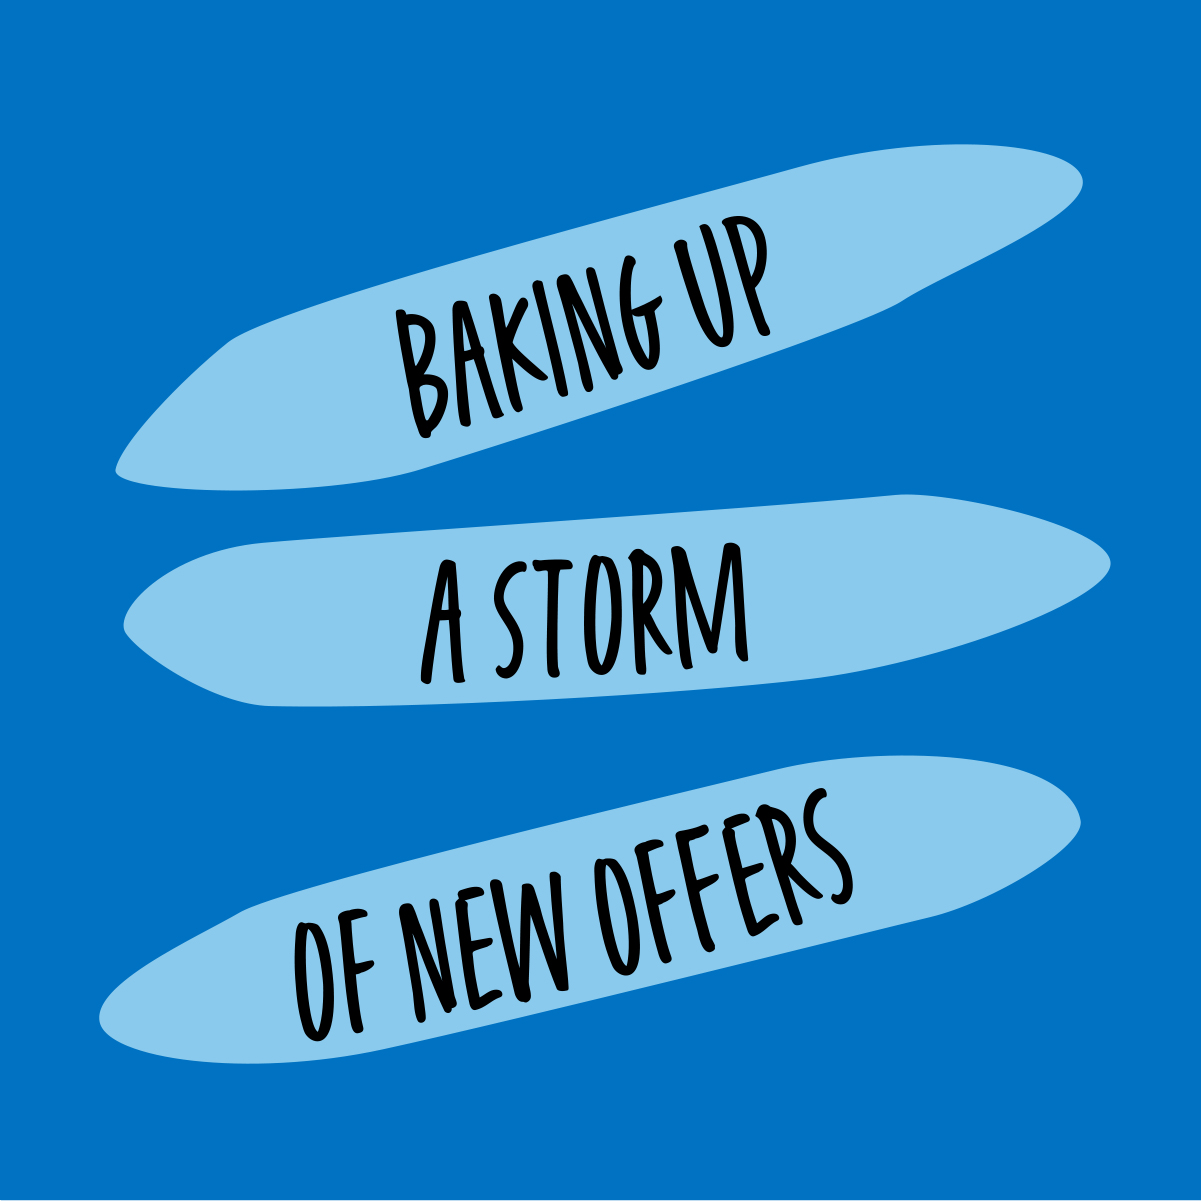 Baking up a storm of new offers